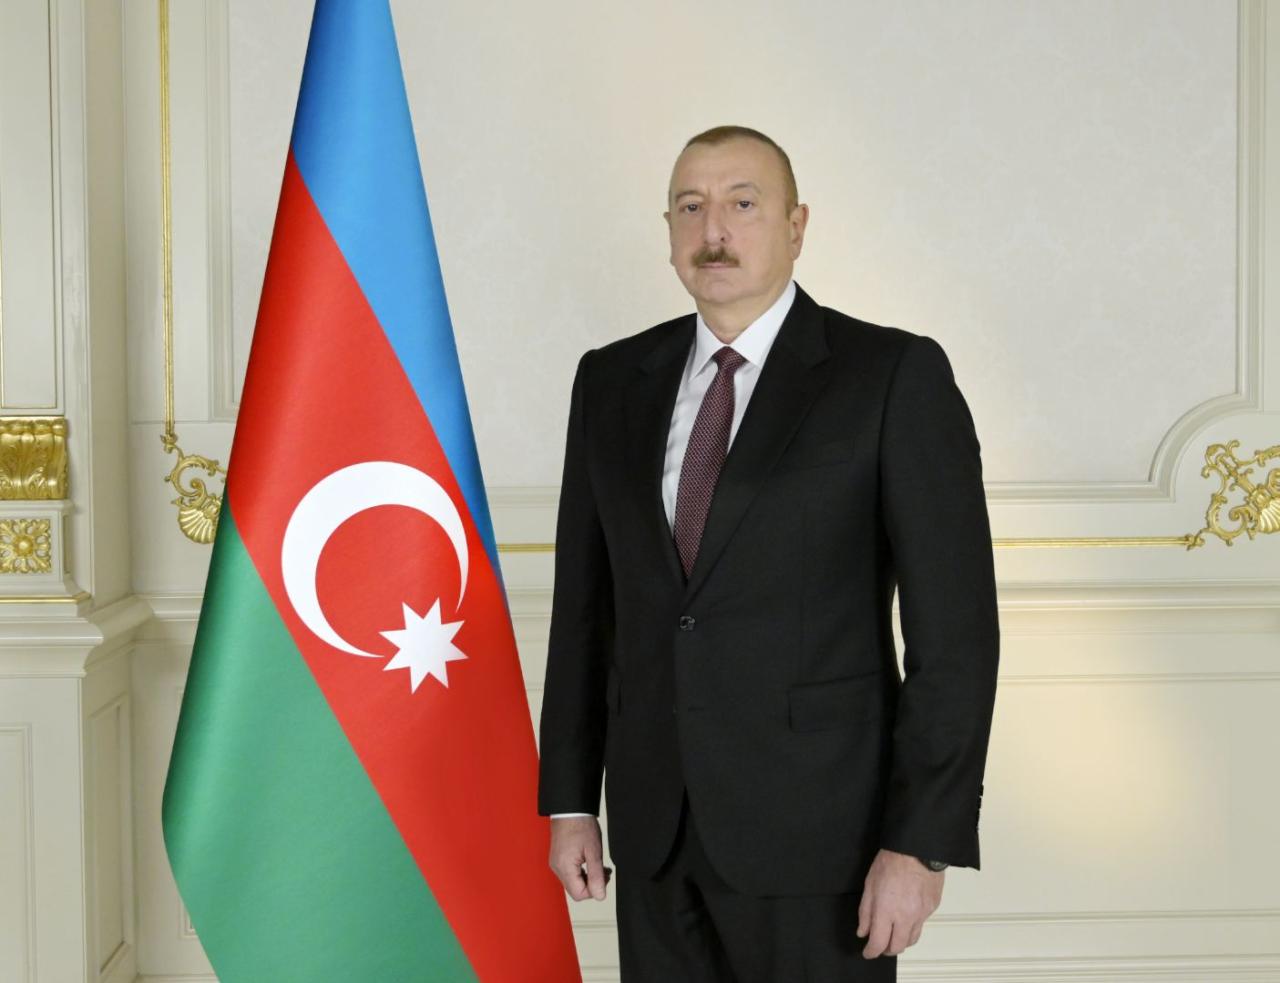 President Ilham Aliyev shares post on occasion of Youth Day [PHOTO]